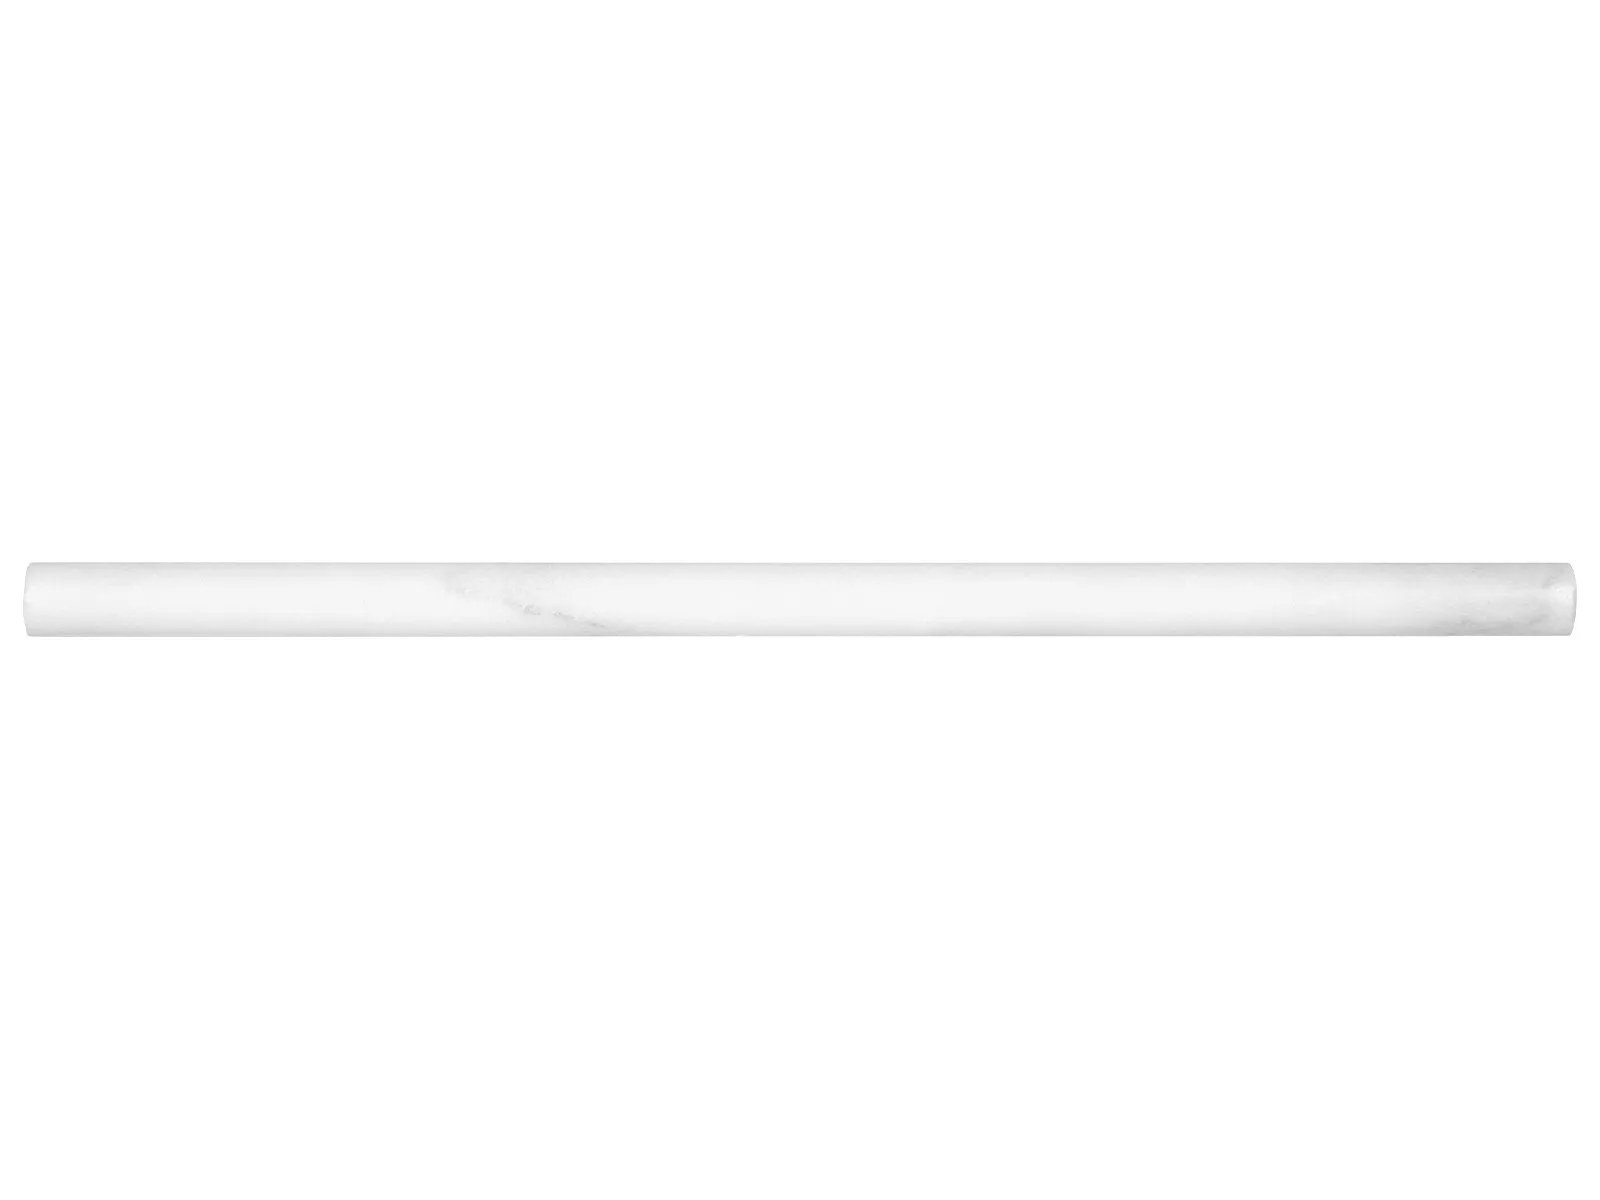 Natural Stone AN Bianco Venatino 5/8x12 Pencil Honed or Polished